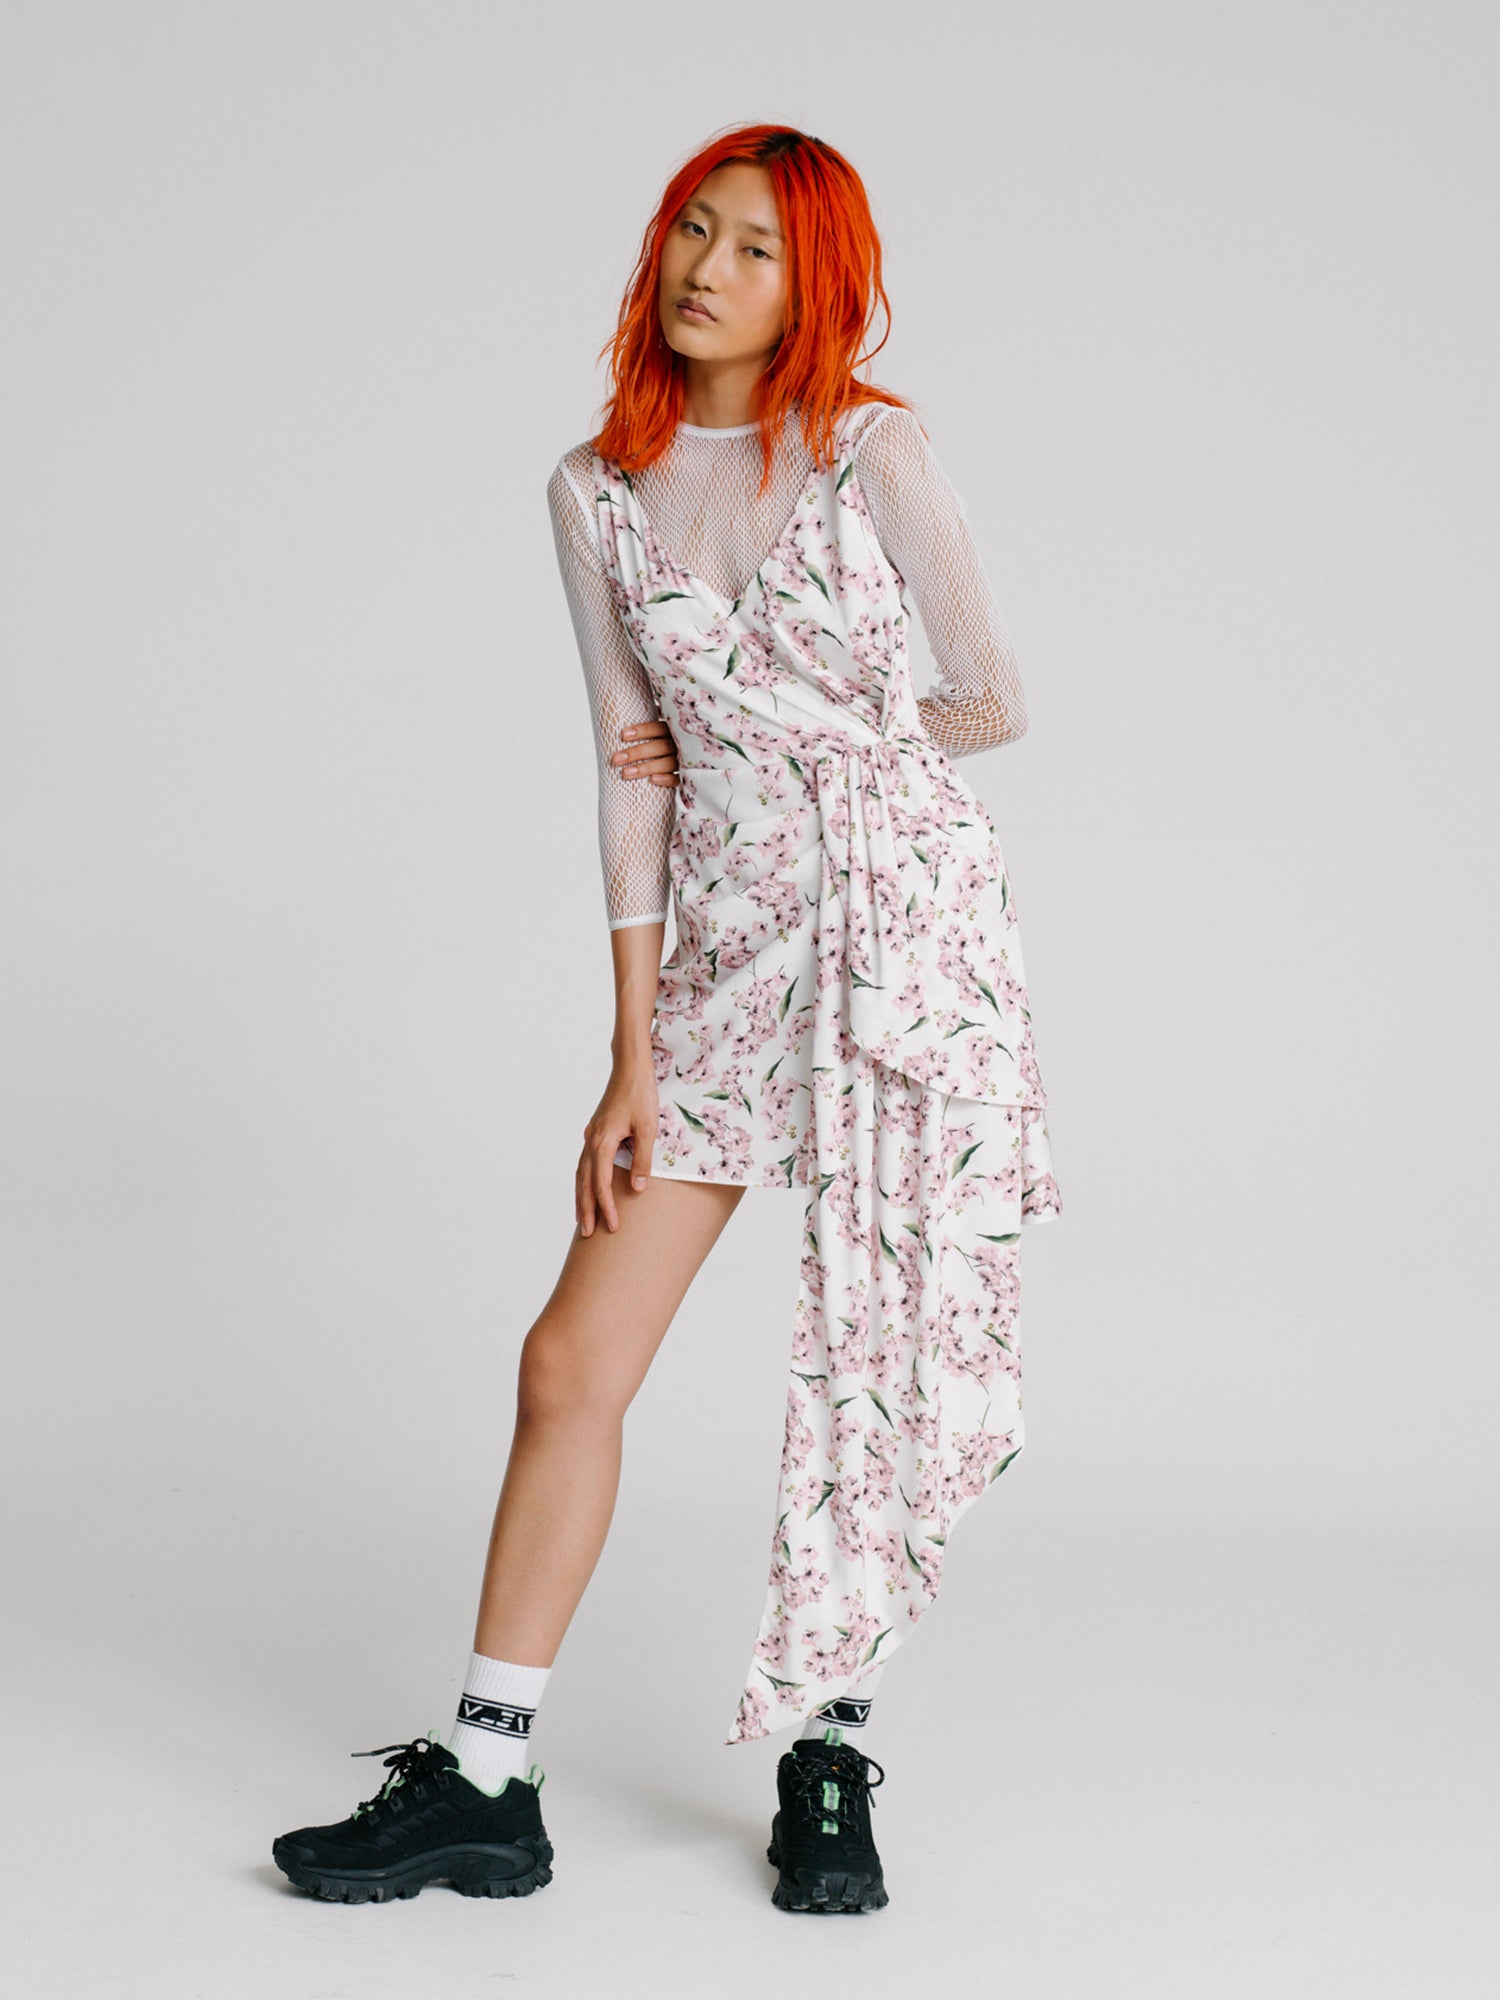 Red hair girl wearing a white floral dress